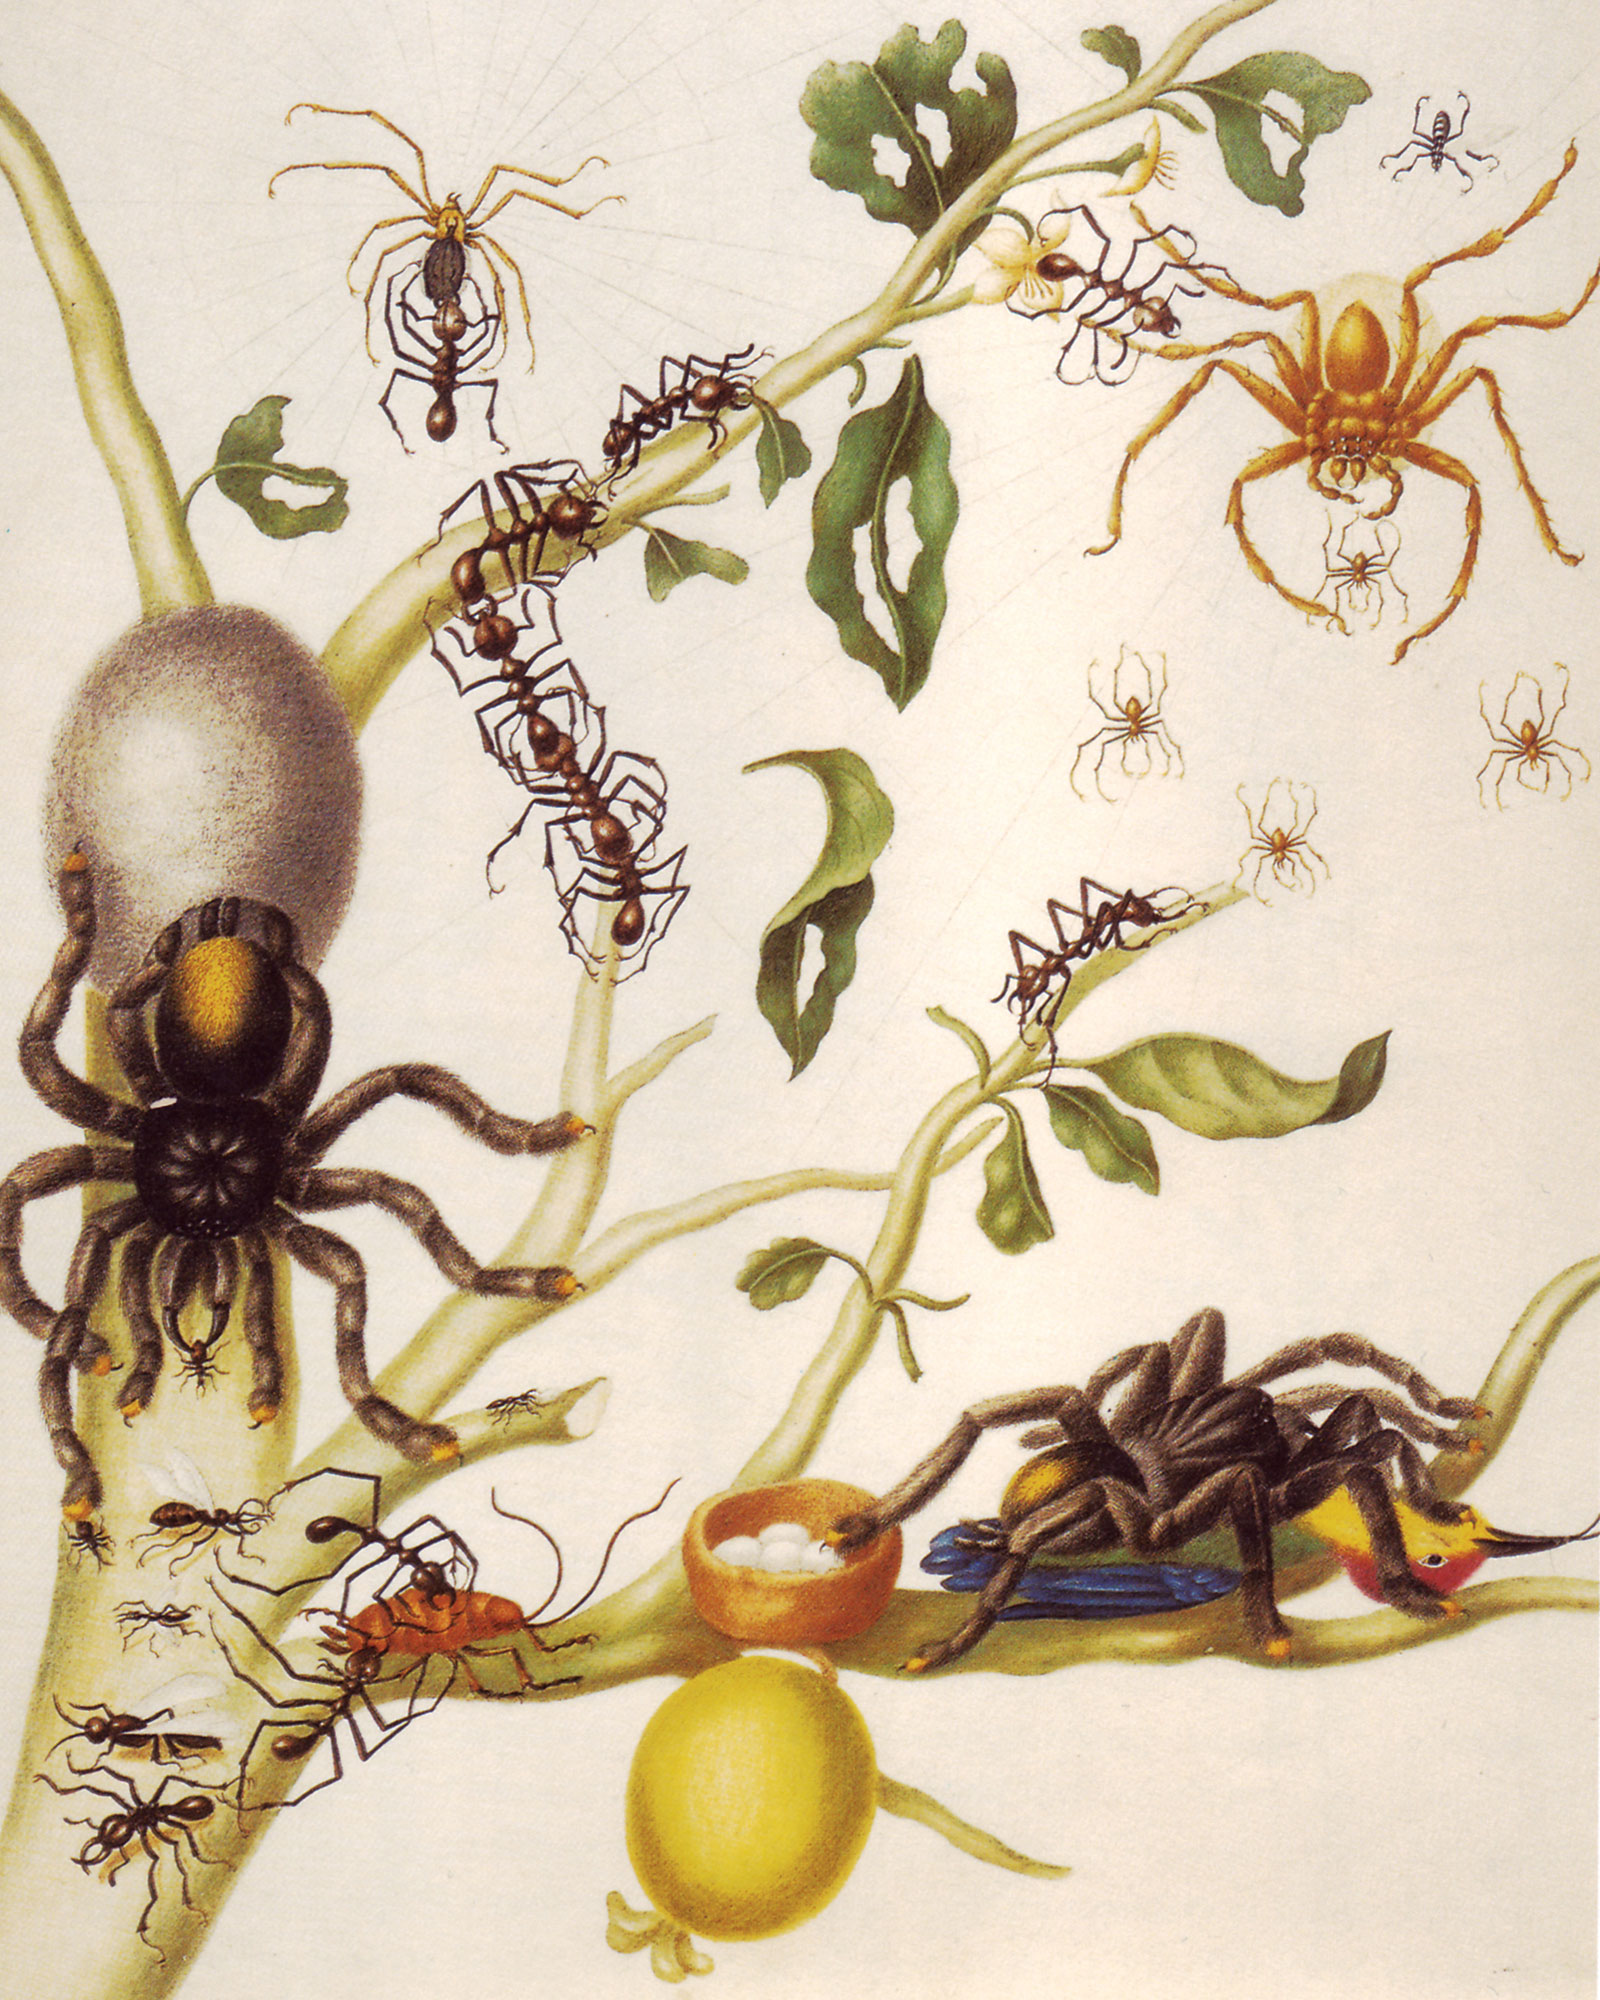 Maria Sibylla Merian’s early eighteenth century illustration titled “Guava tree, various insects and a hummingbird.”